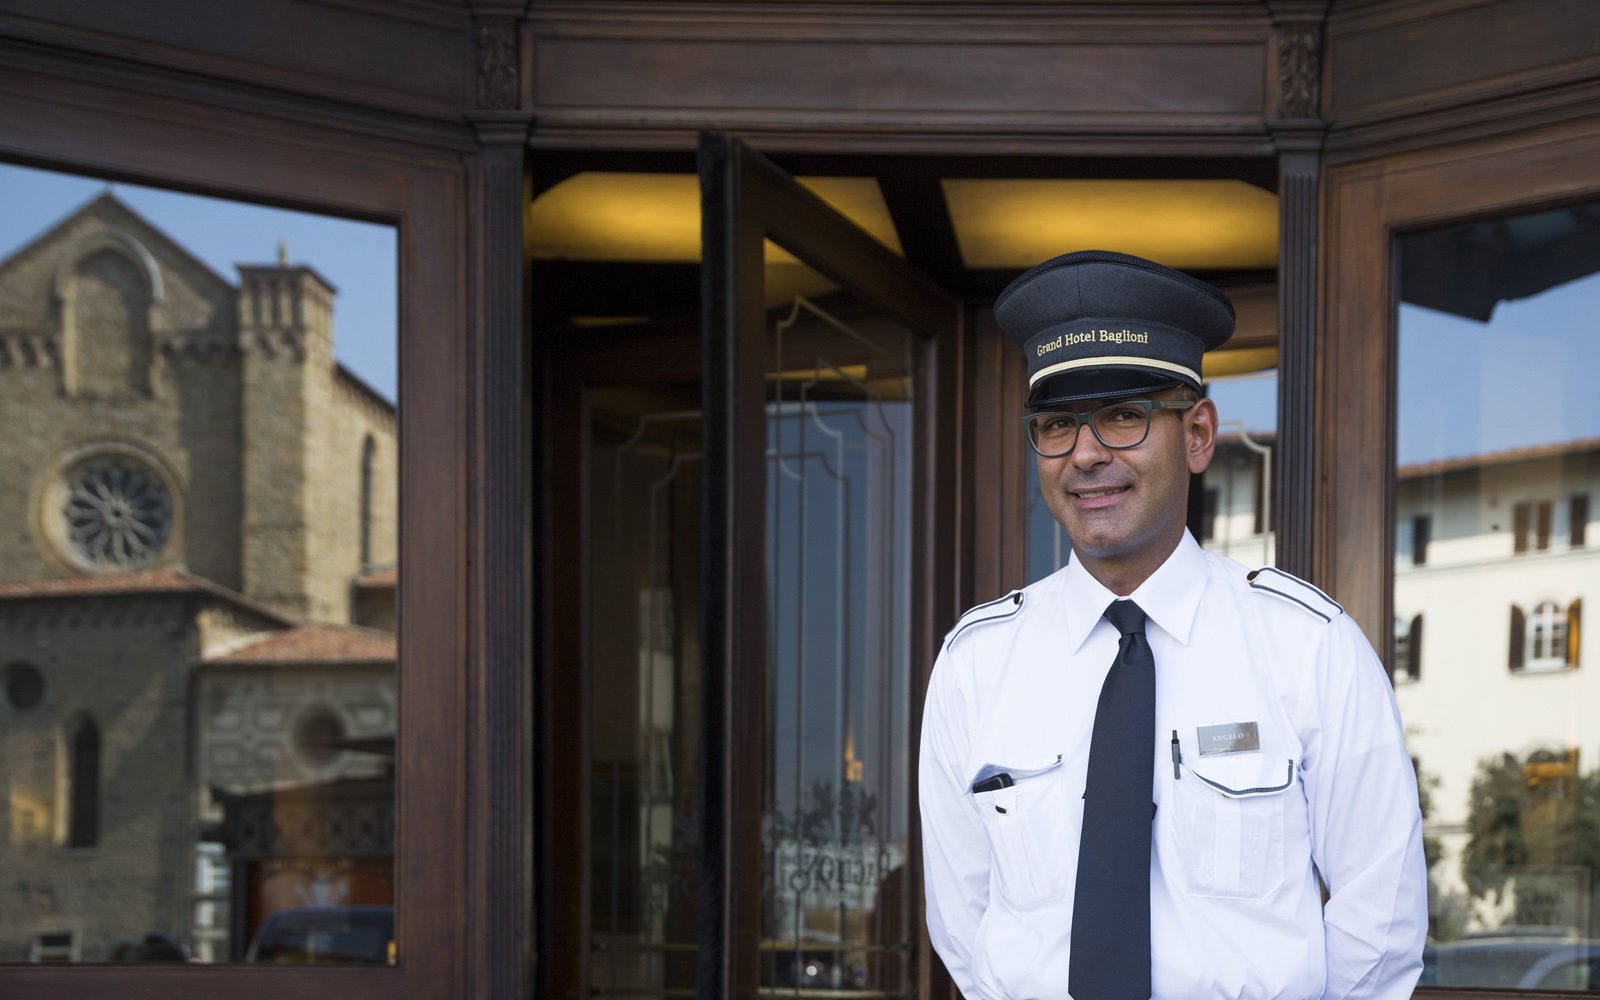 Reopening of the Grand Hotel Baglioni